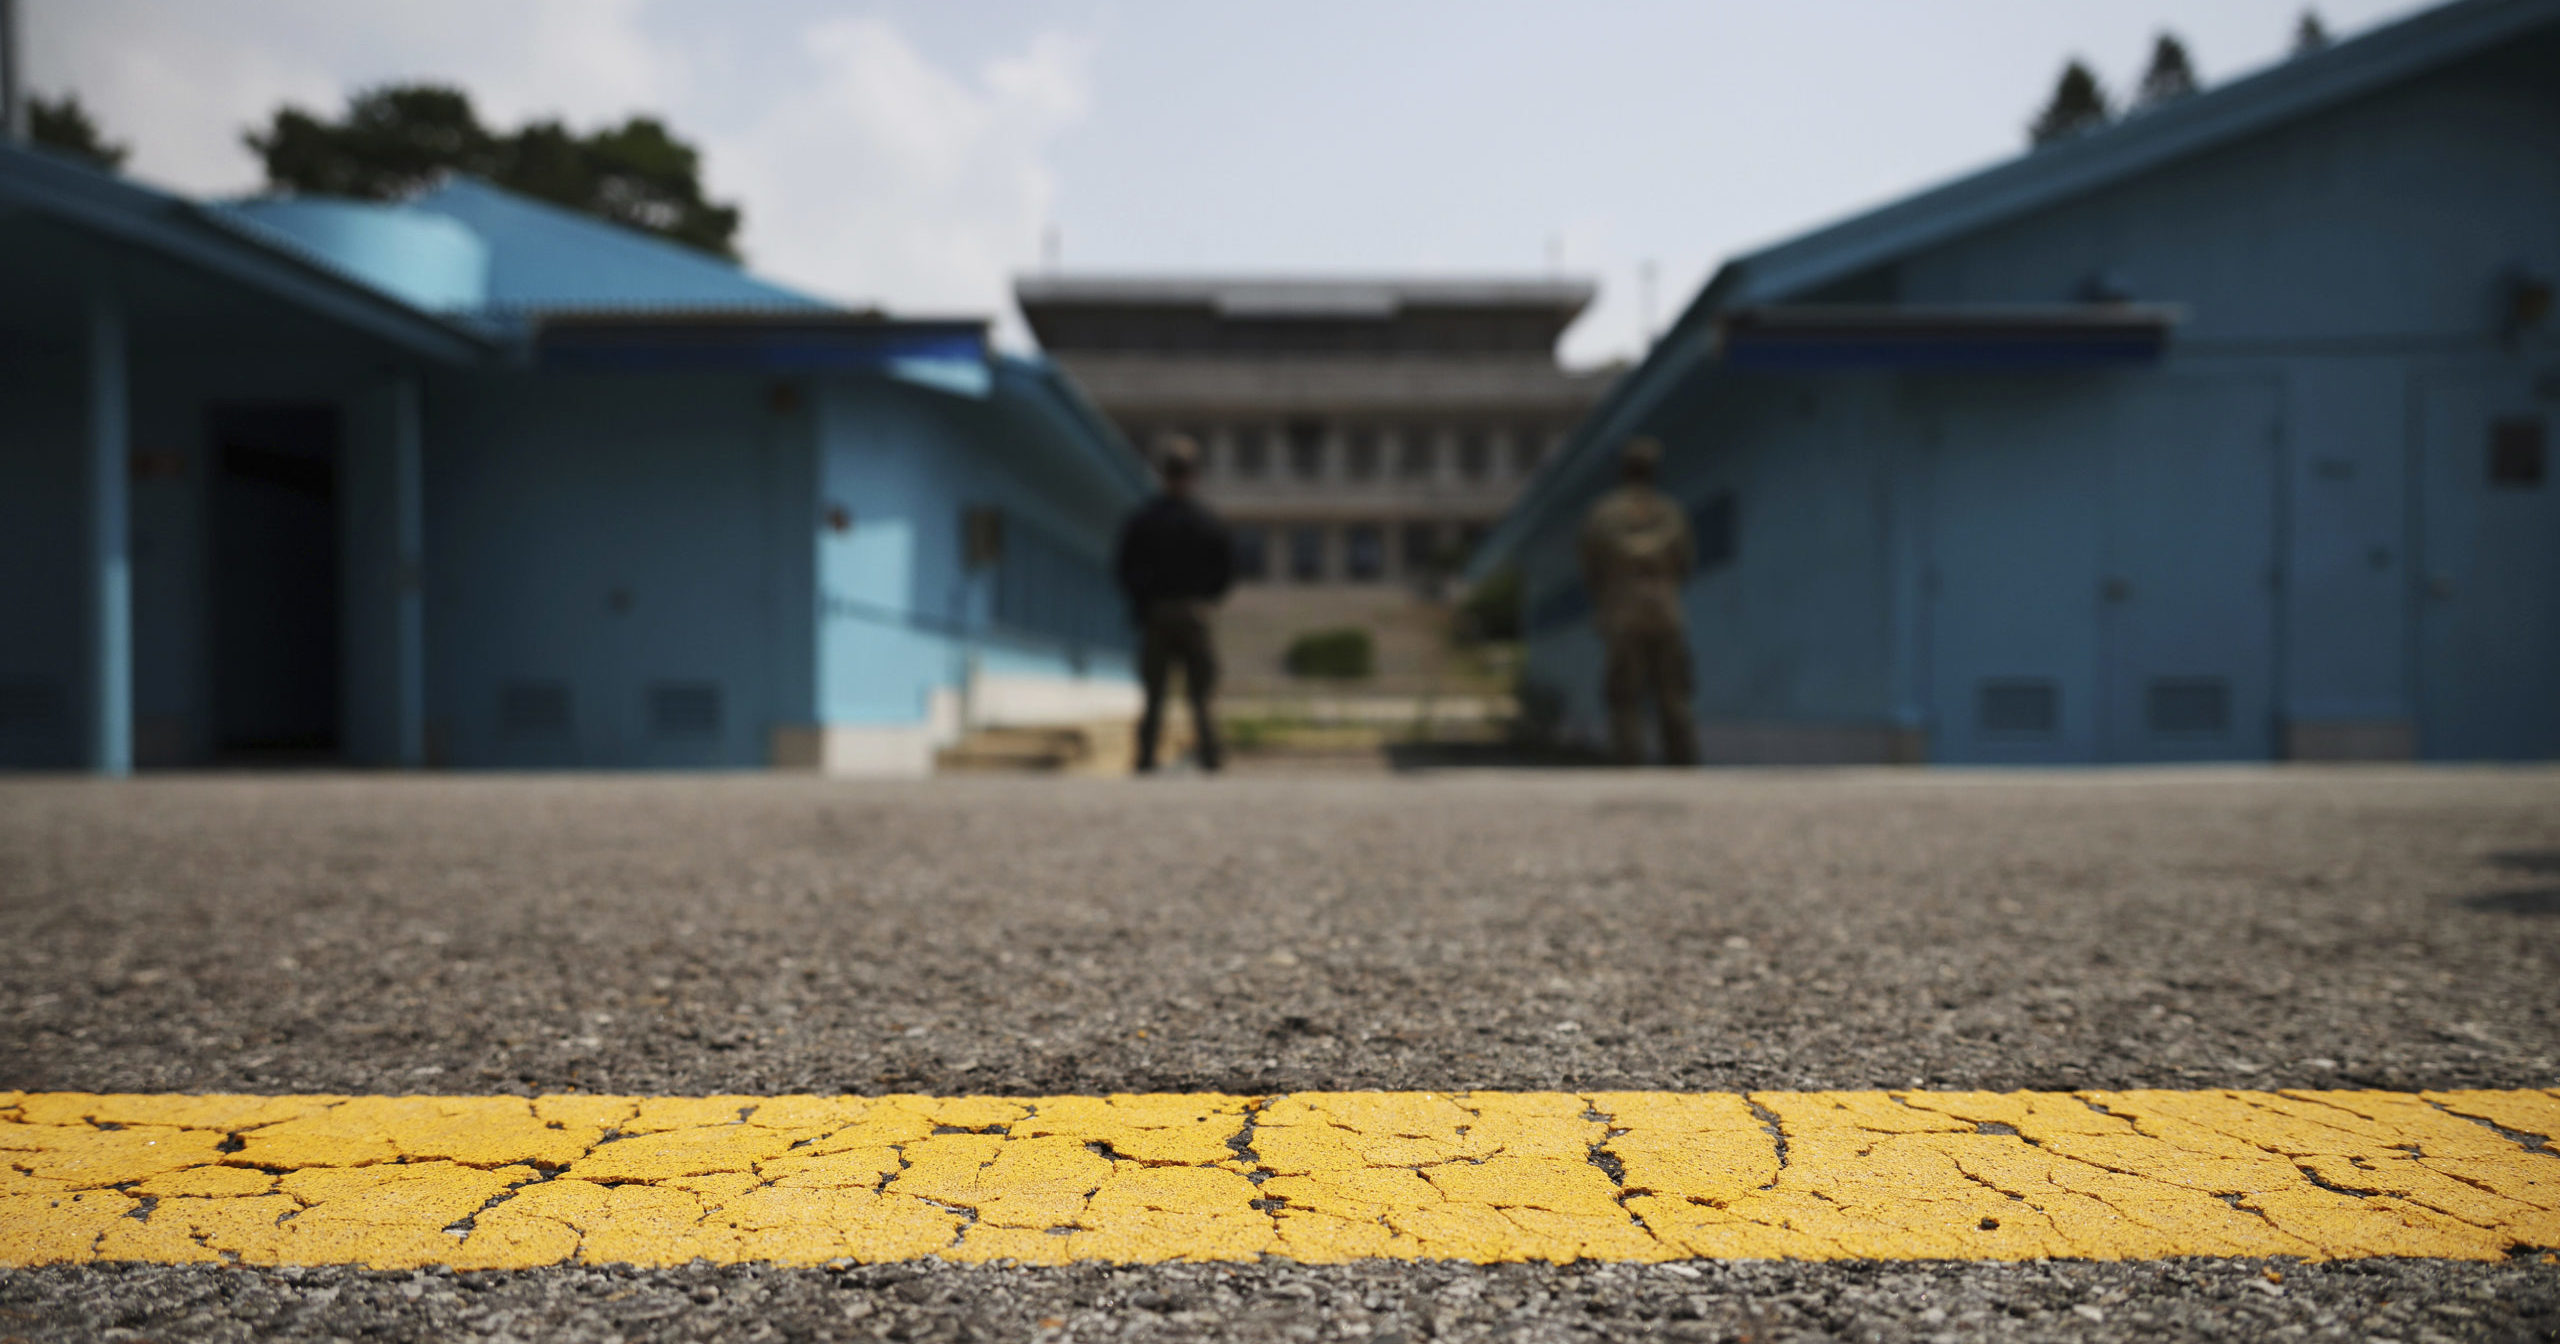 A general view shows the truce village of Panmunjom inside the demilitarized zone separating the two Koreas on July 19, 2022.